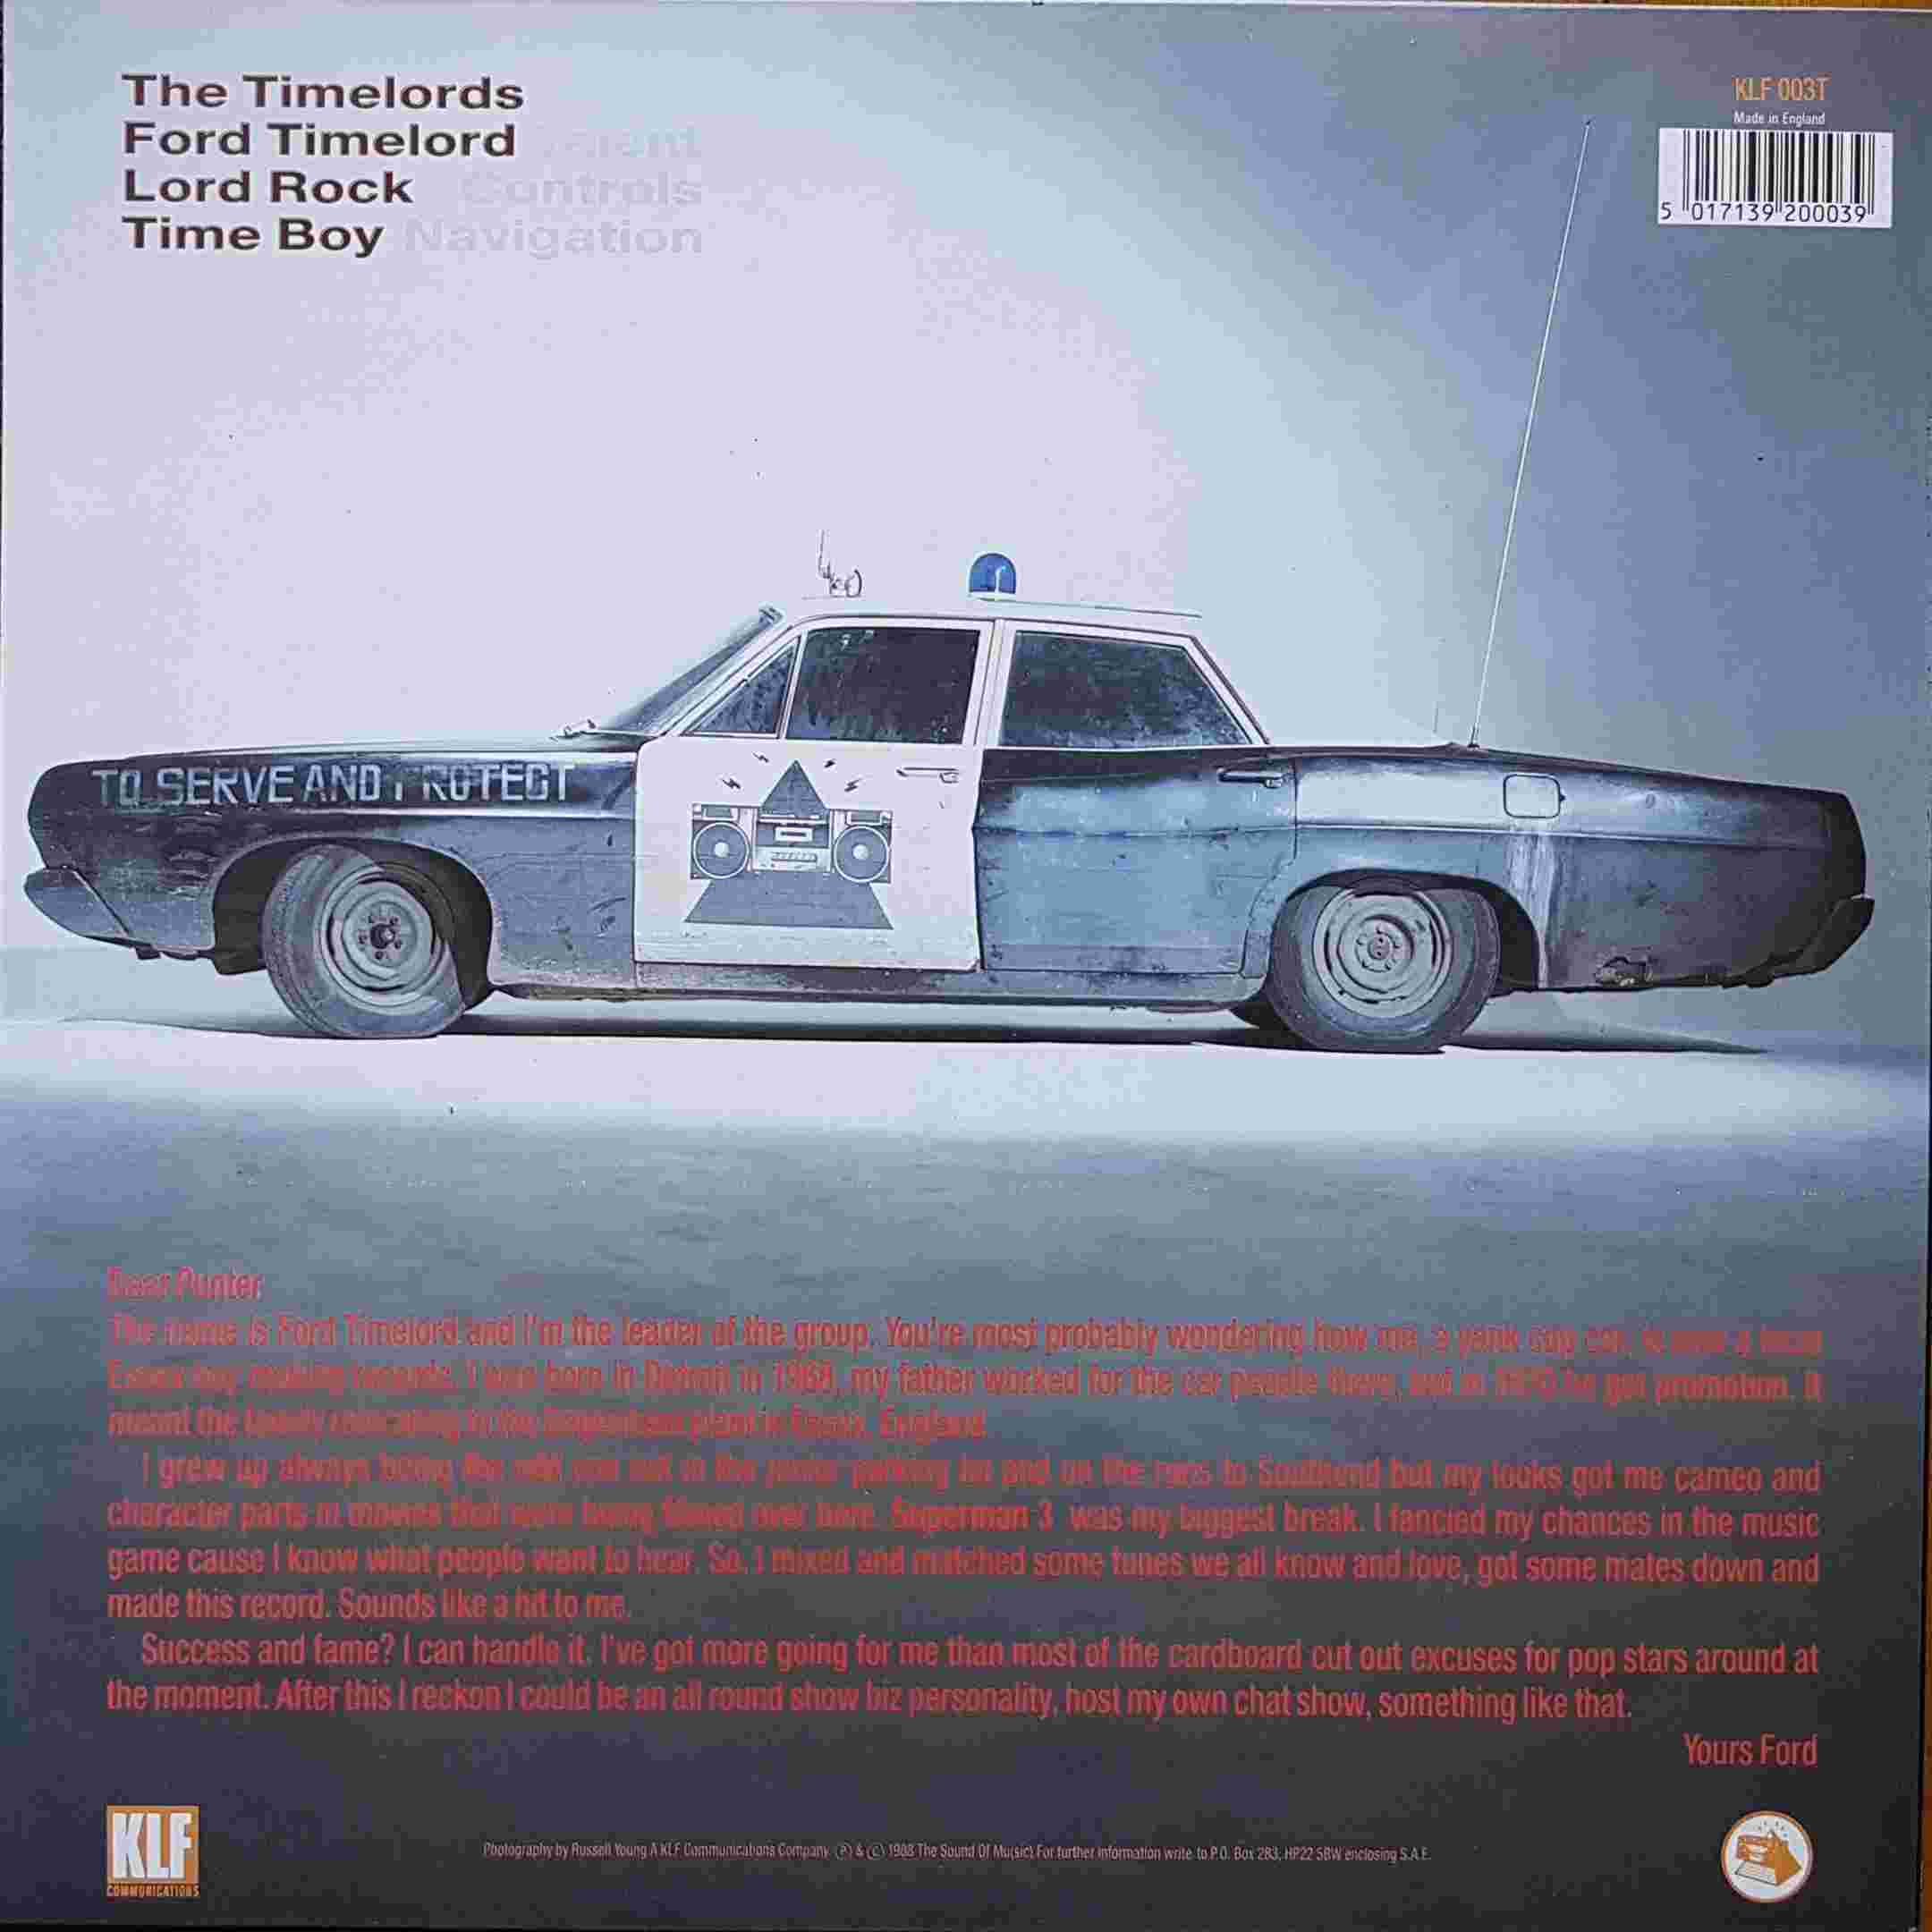 Picture of KLF 003T Doctorin' the Tardis by artist Ron Grainer / The Timelords from the BBC records and Tapes library